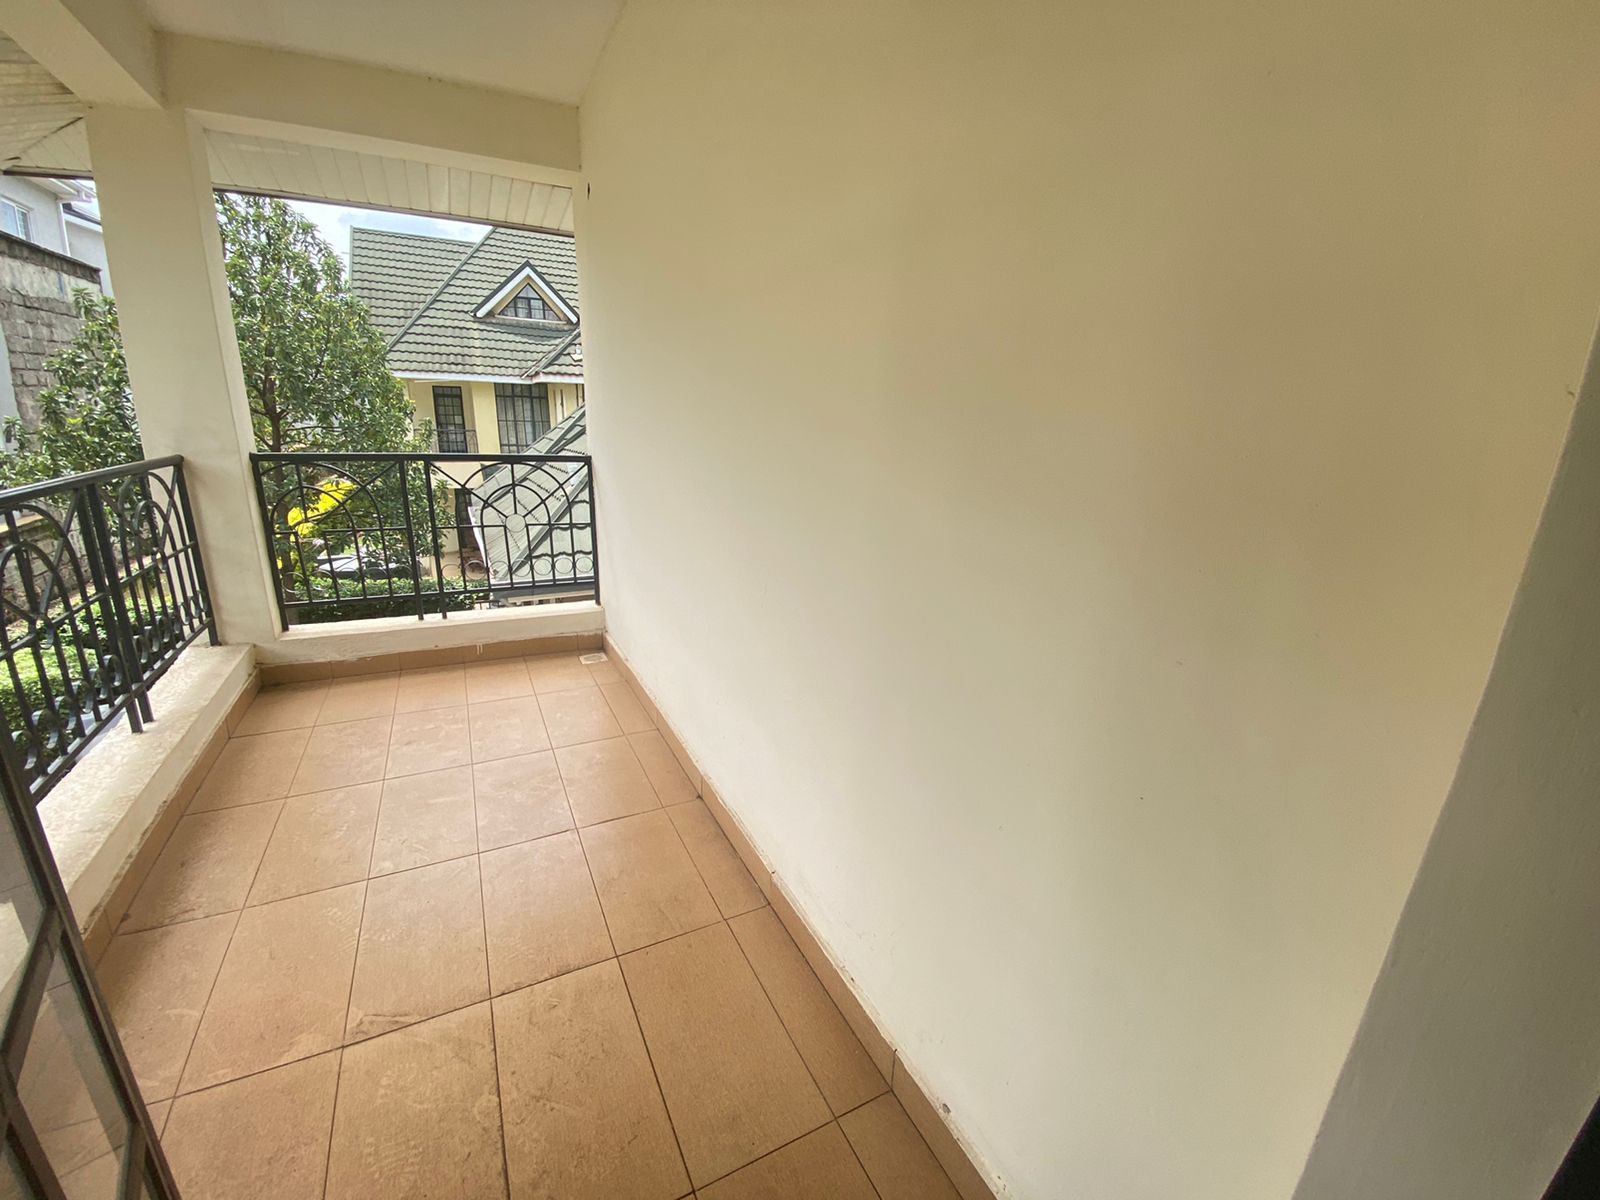 5 bedroom House in lavington all ensuite plus dsq for Sale at Ksh47m Negotiable (13)